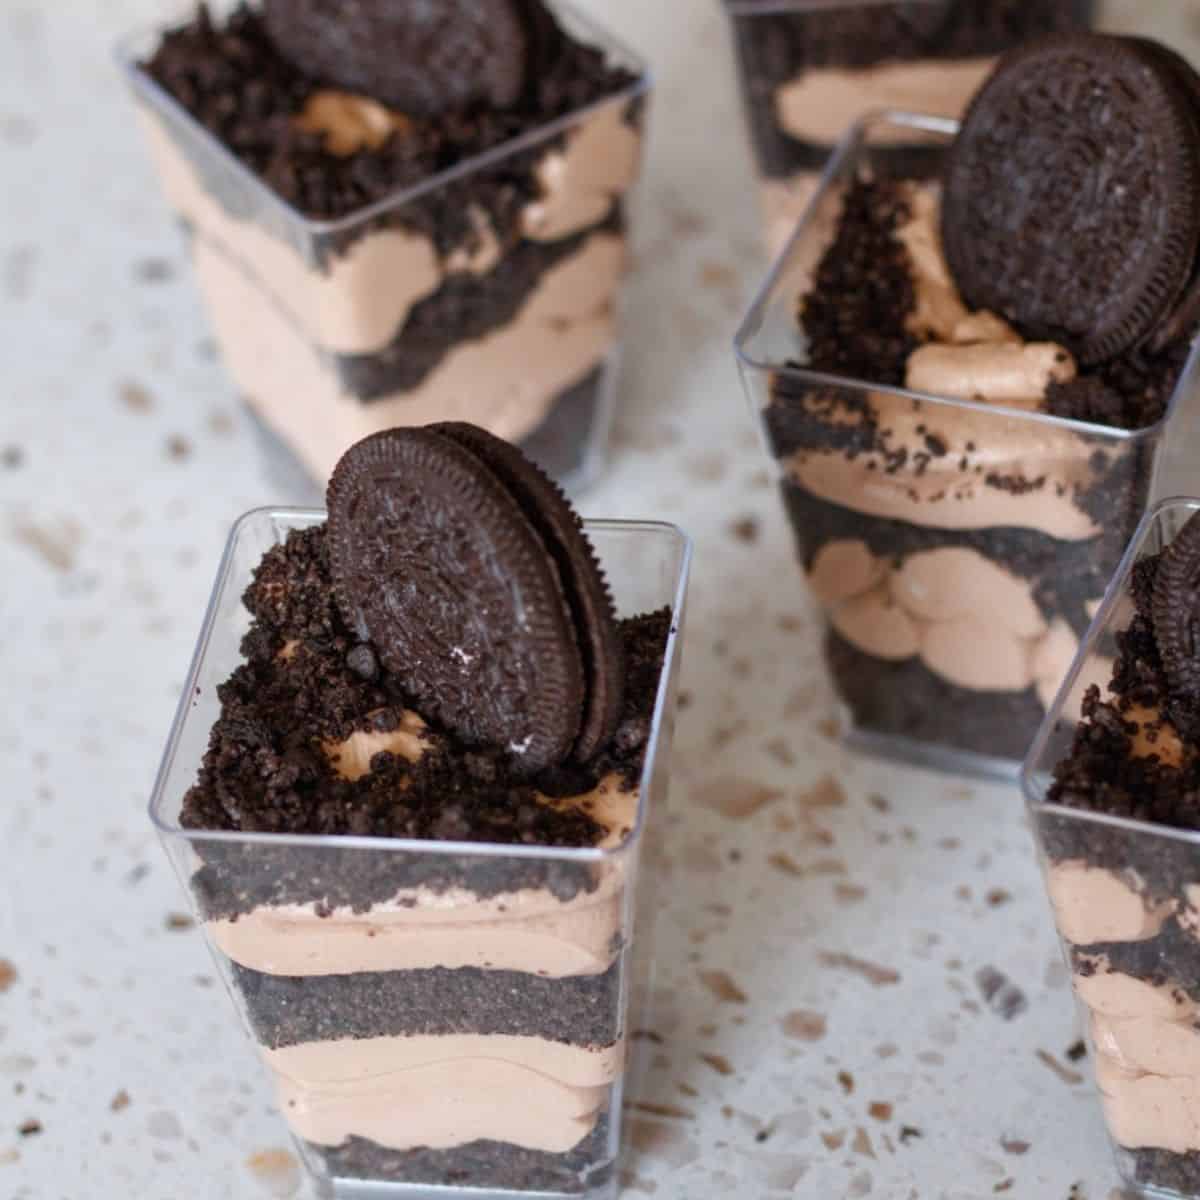 No Bake Oreo dessert cups with alternating layers of crushed Oreos and chocolate whipped cream topped with an Oreo cookie and crumbs